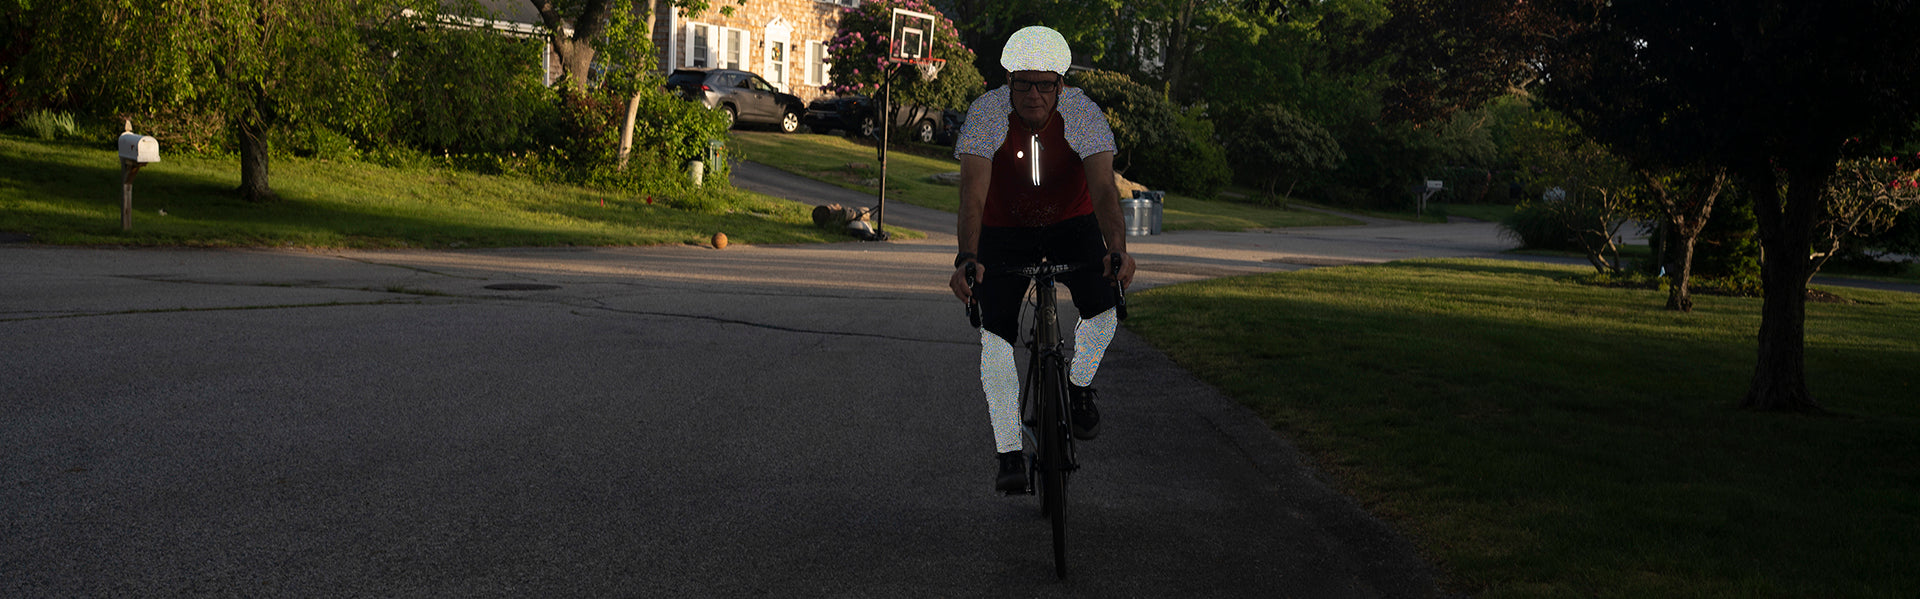 A man riding a bicycle towards the camera. He is wearing a reflective bike jersey, helmet cover, and leggings.